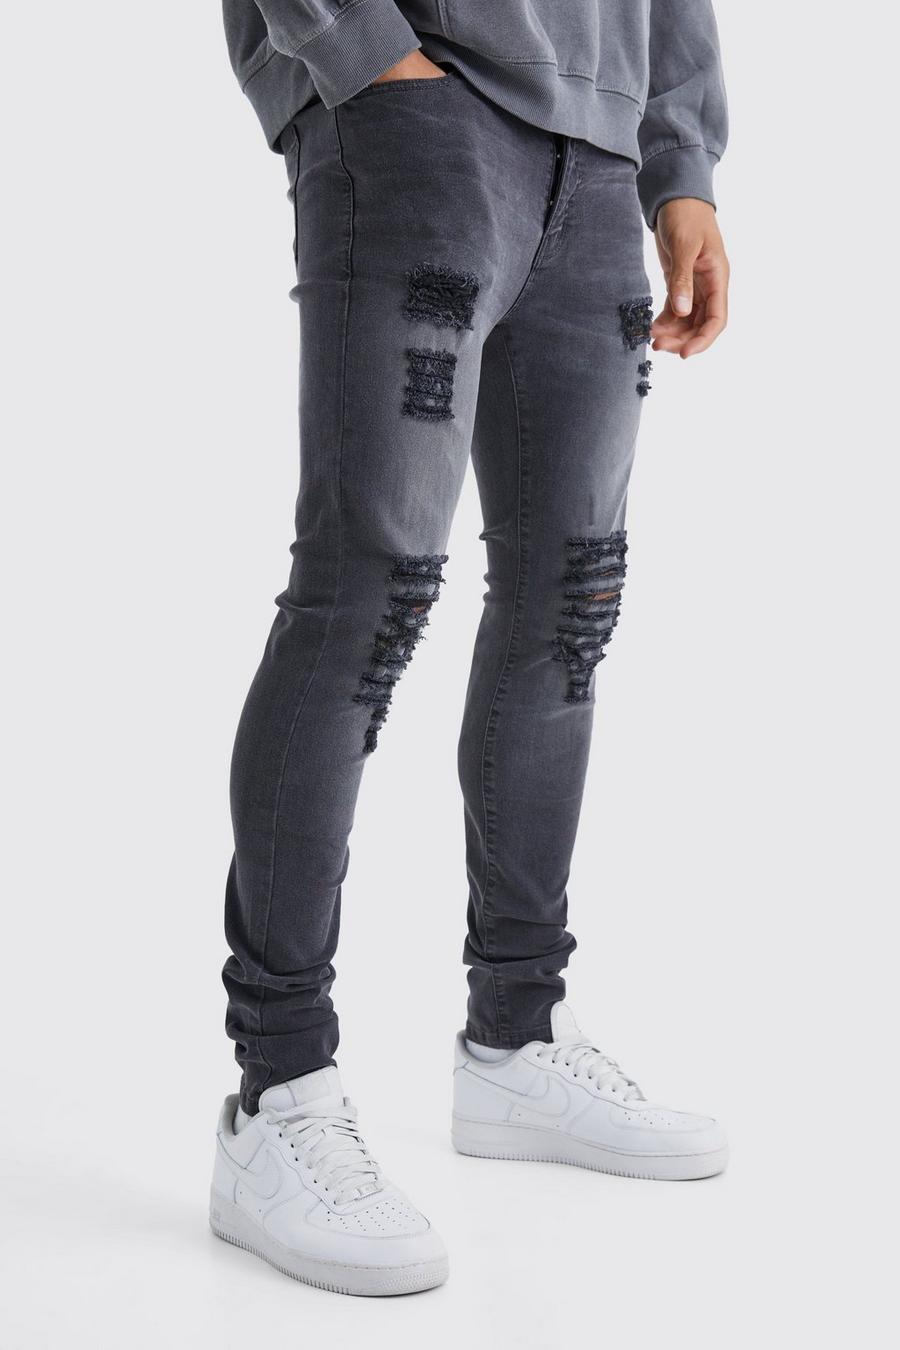 Charcoal Tall Gescheurde Skinny Jeans